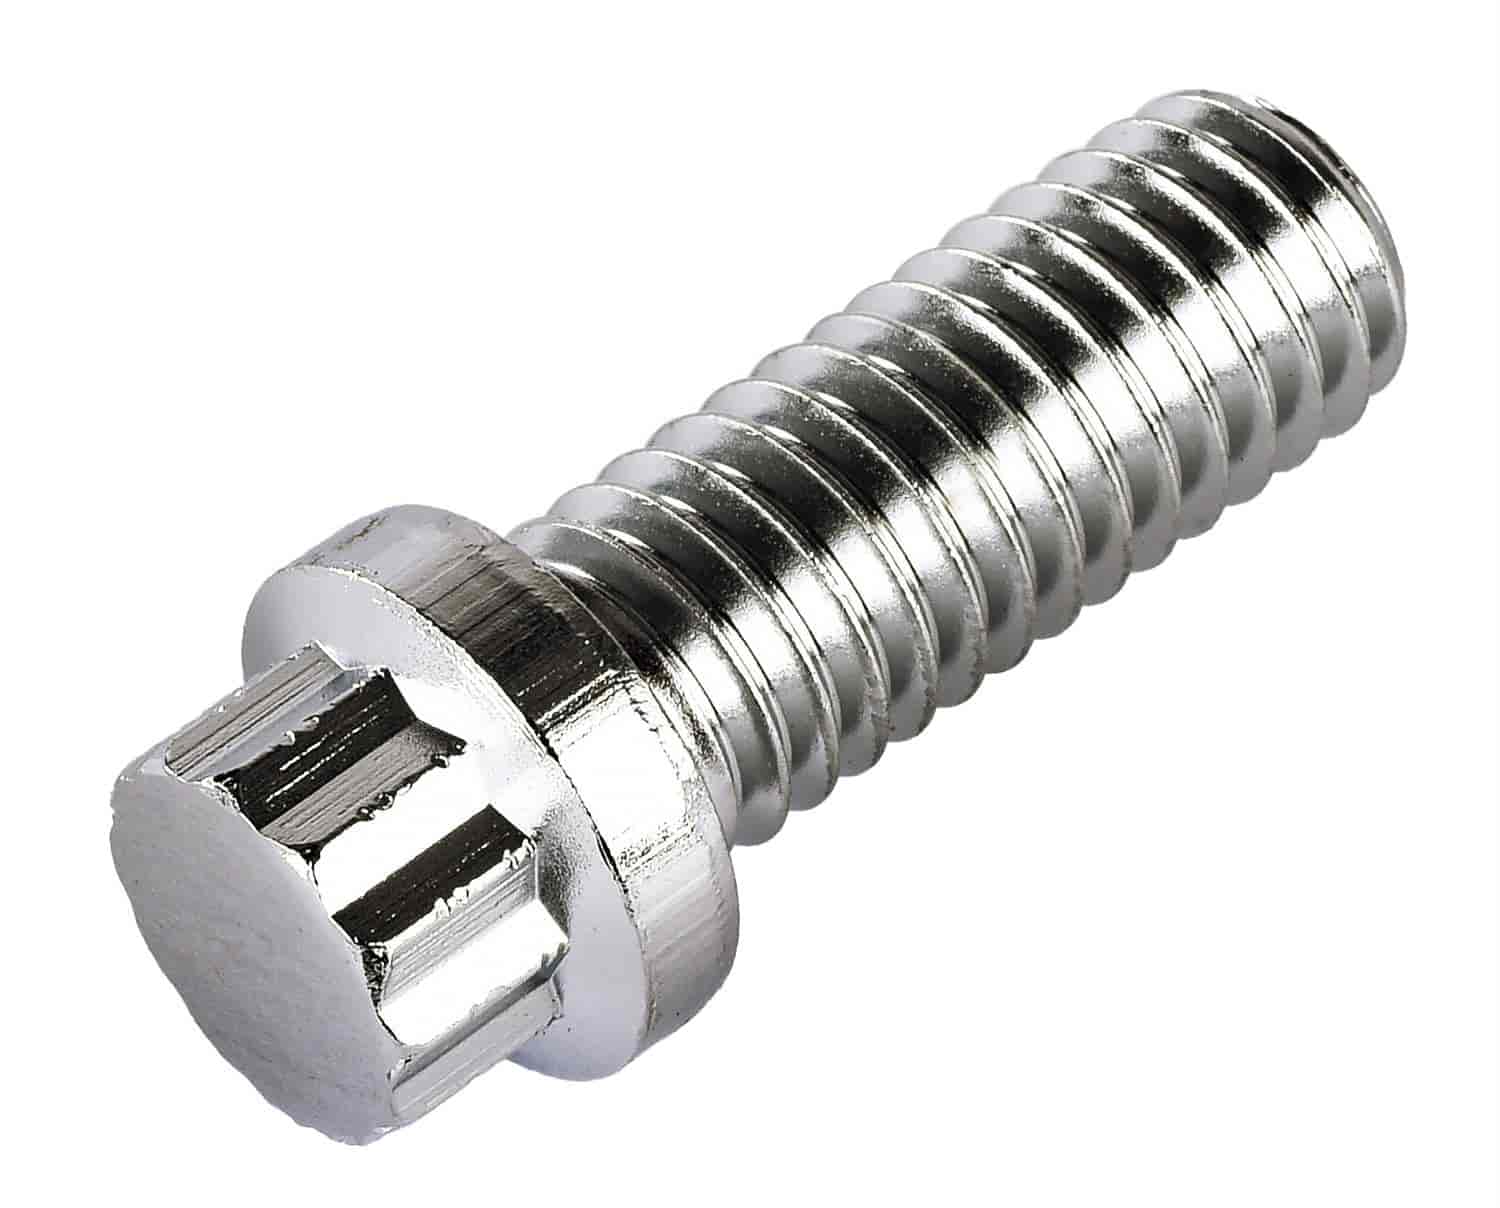 12-Point Fastener [3/8 in. -16 Thread x 1 in. Length]